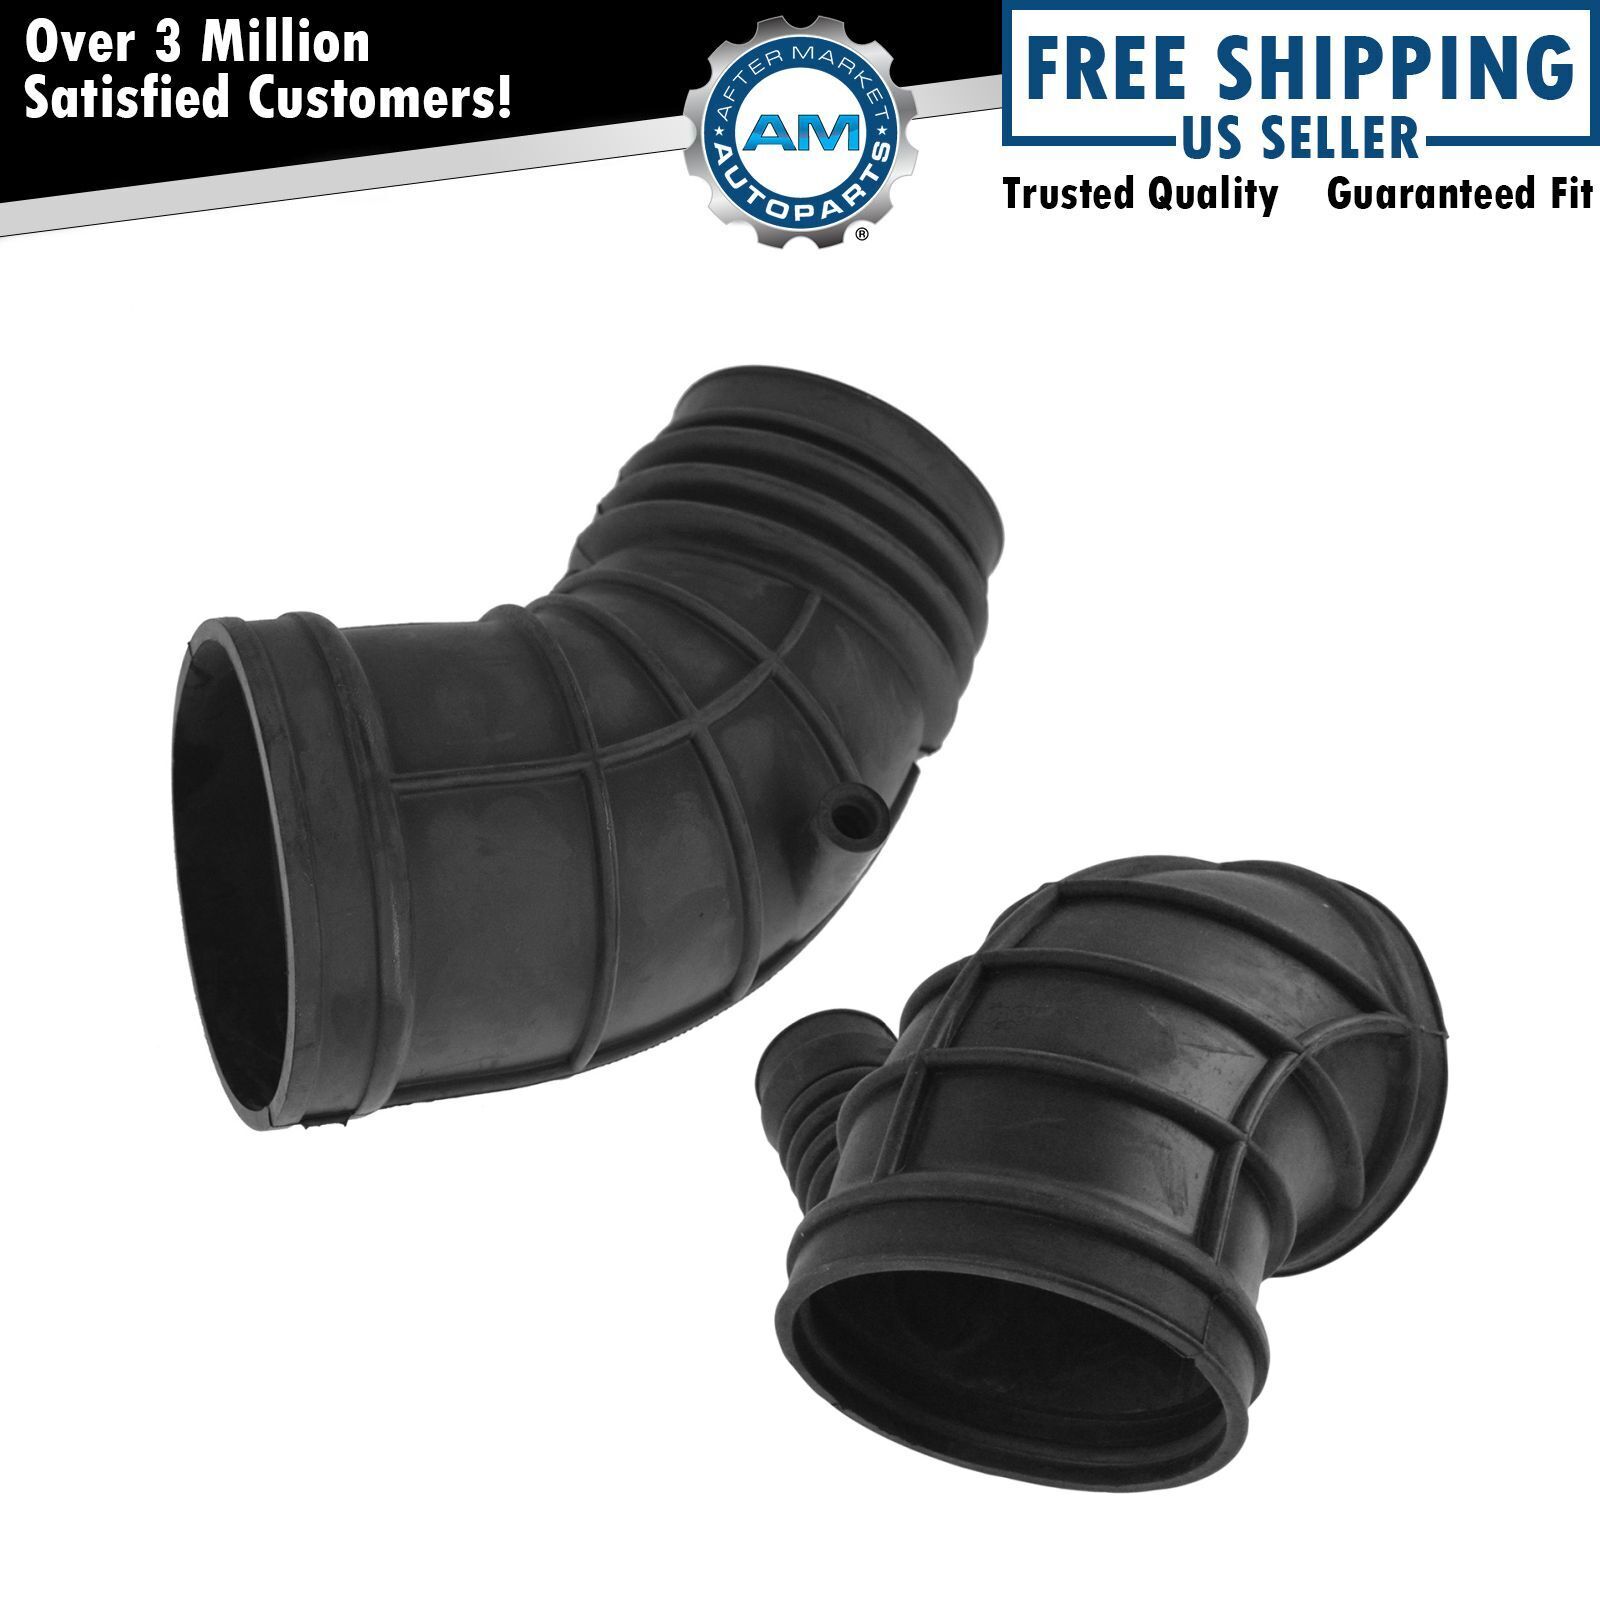 Tube Elbow Throttle Body Air Intake Boot Hose Pair for 325Ci 325i 330CI 330i Z3